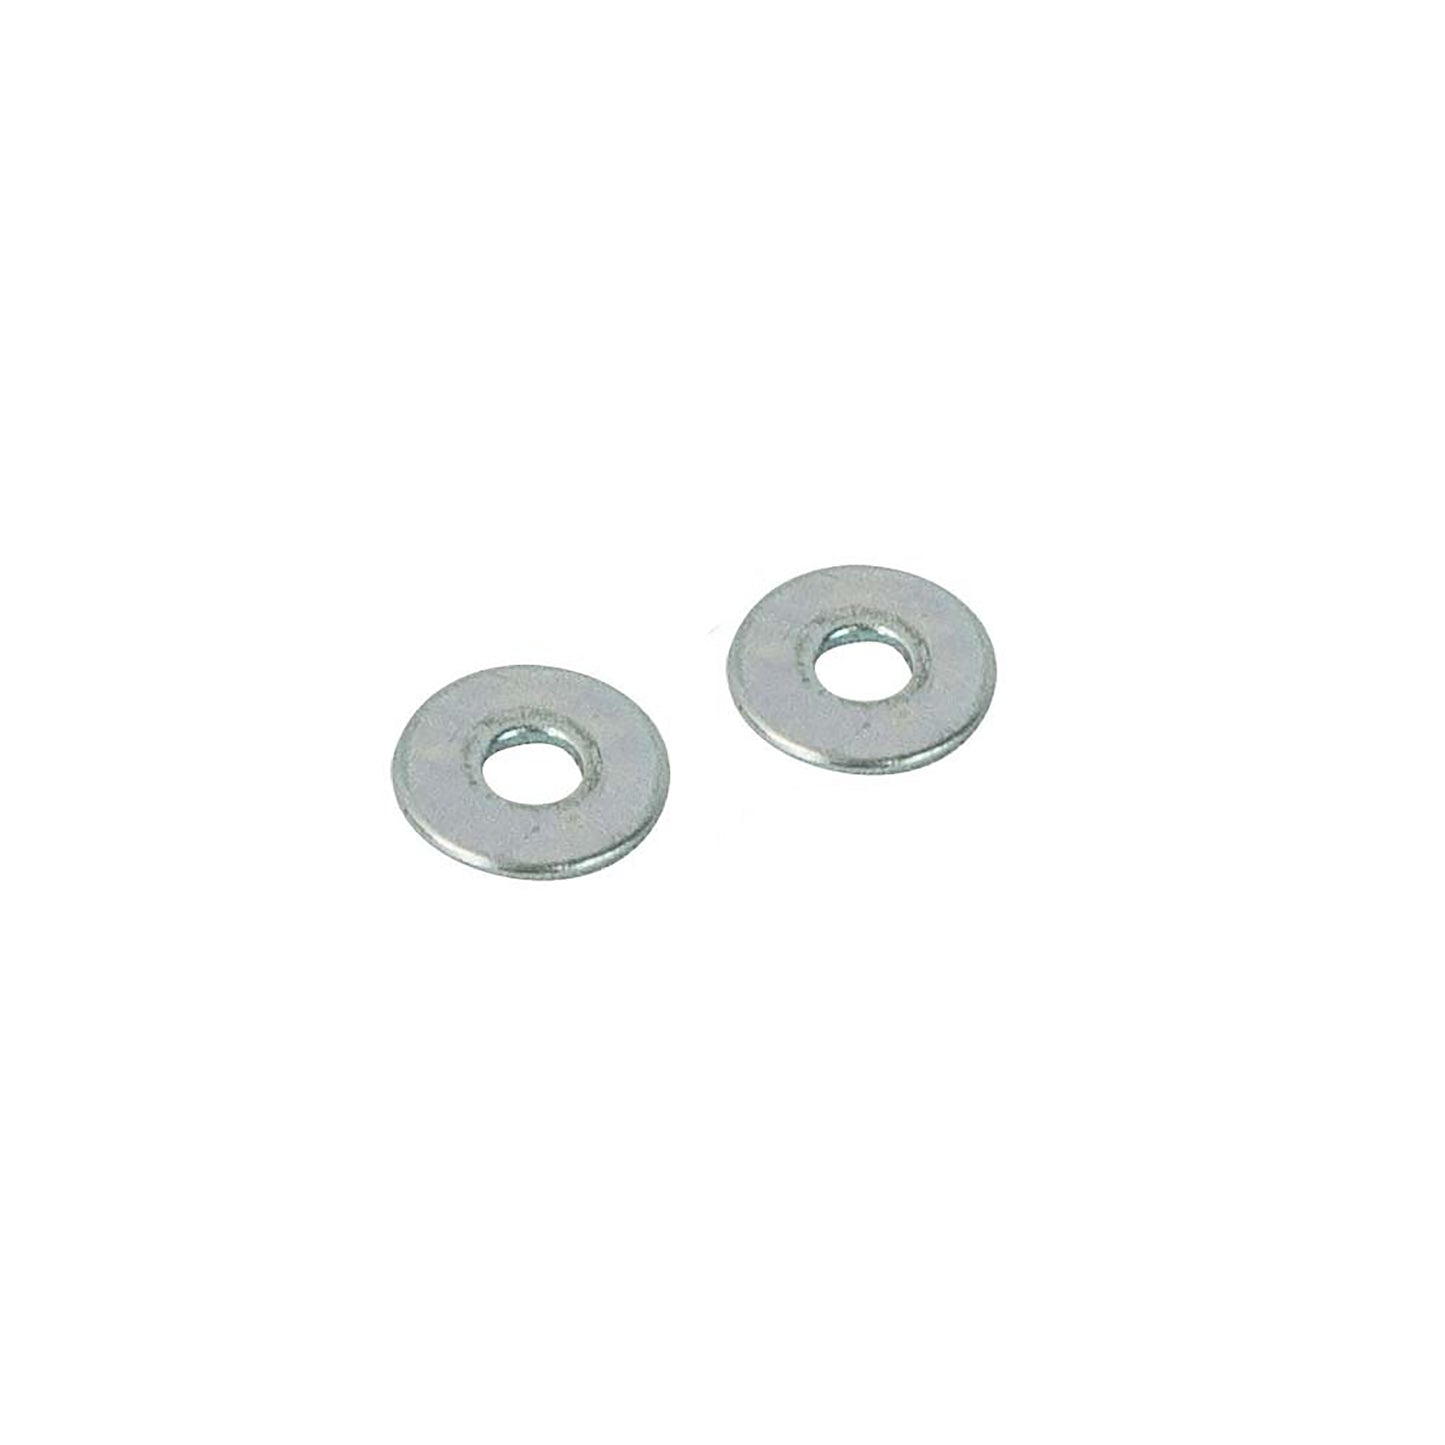 M5 Stainless Flat Washer for XPOWER XD-75LH and XD-85LH